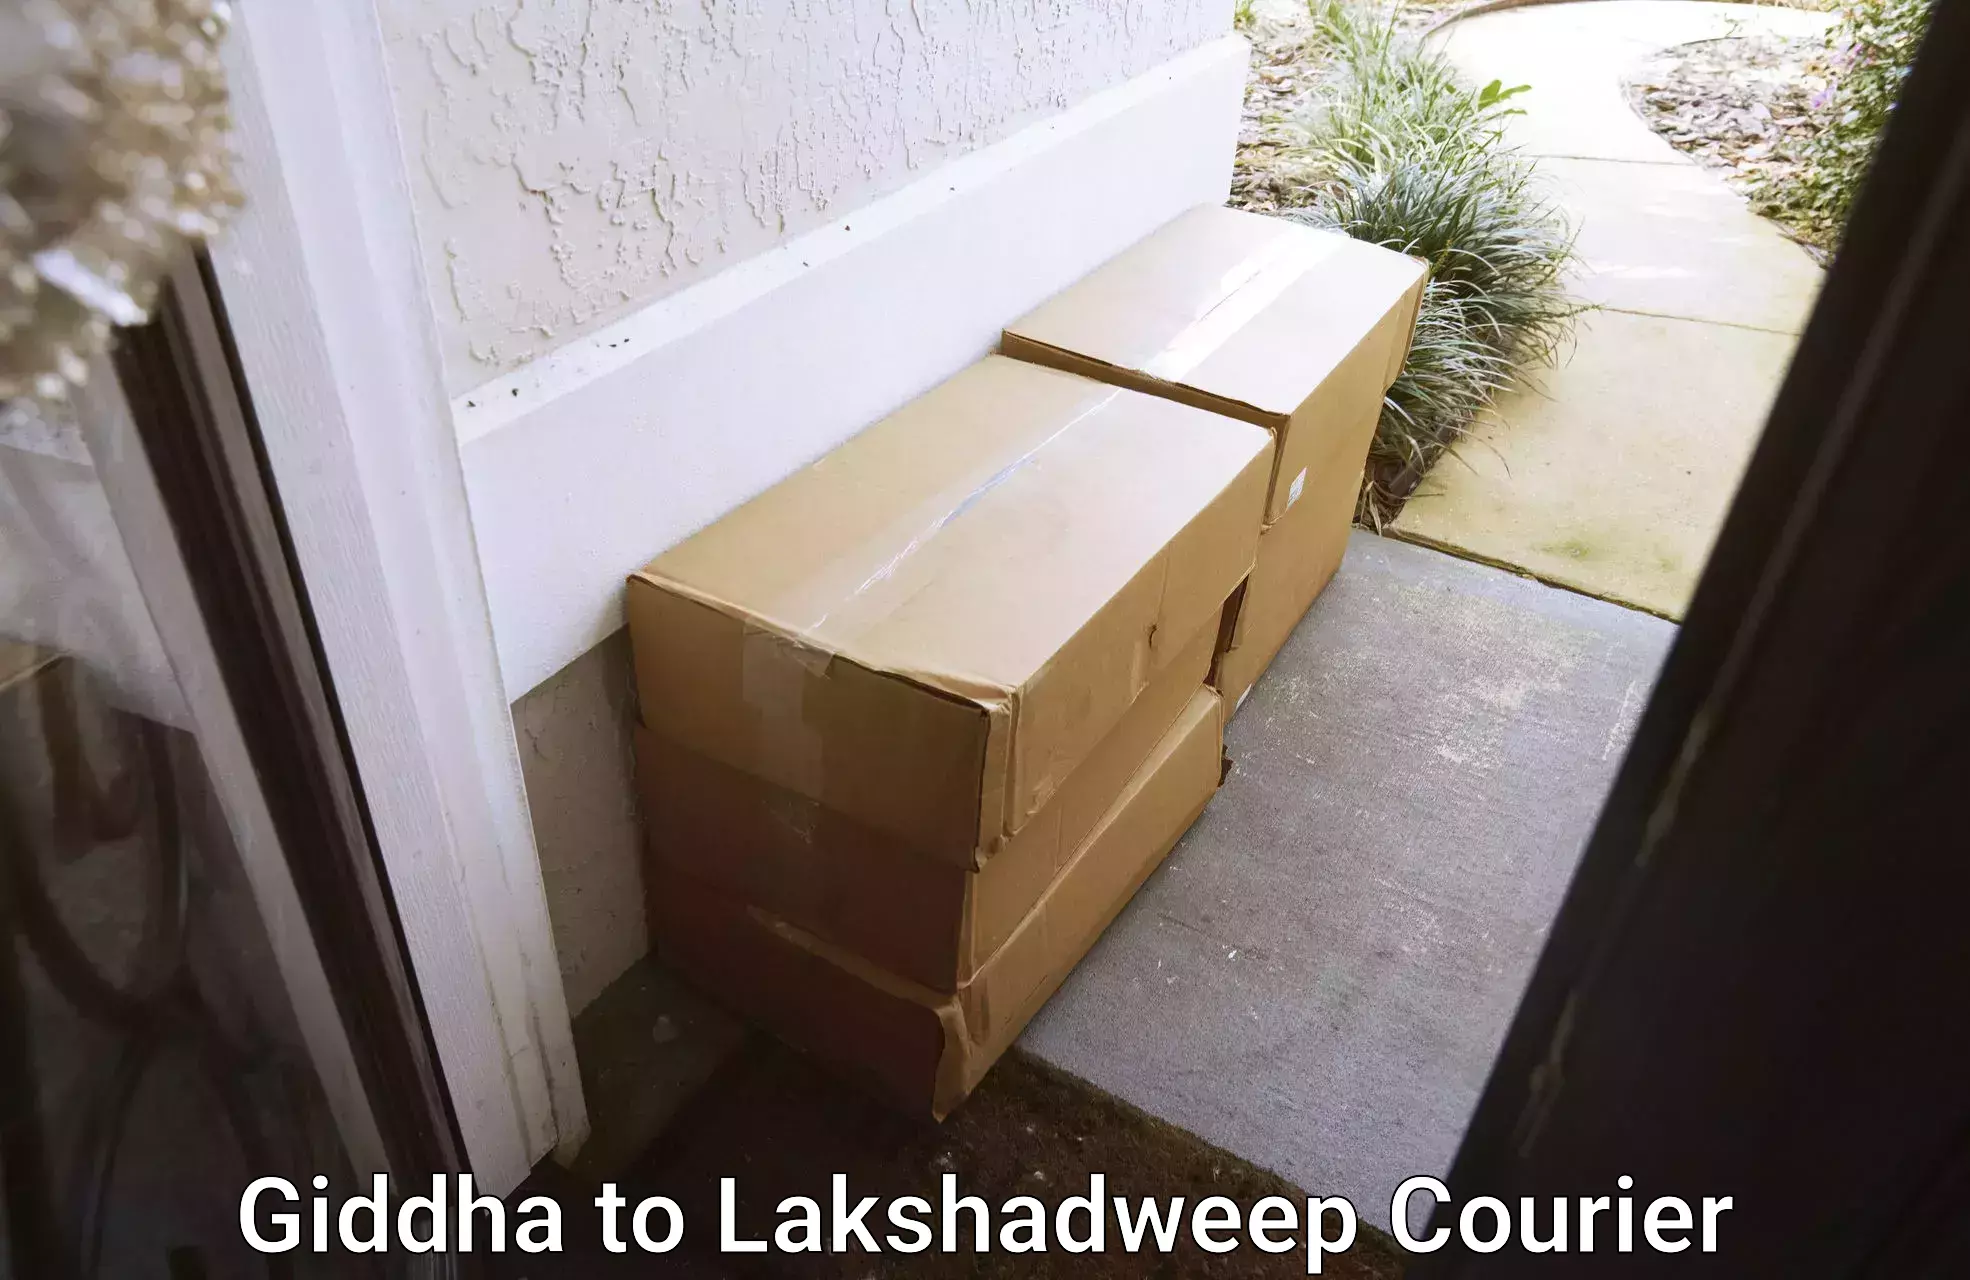 Cost-effective moving options Giddha to Lakshadweep